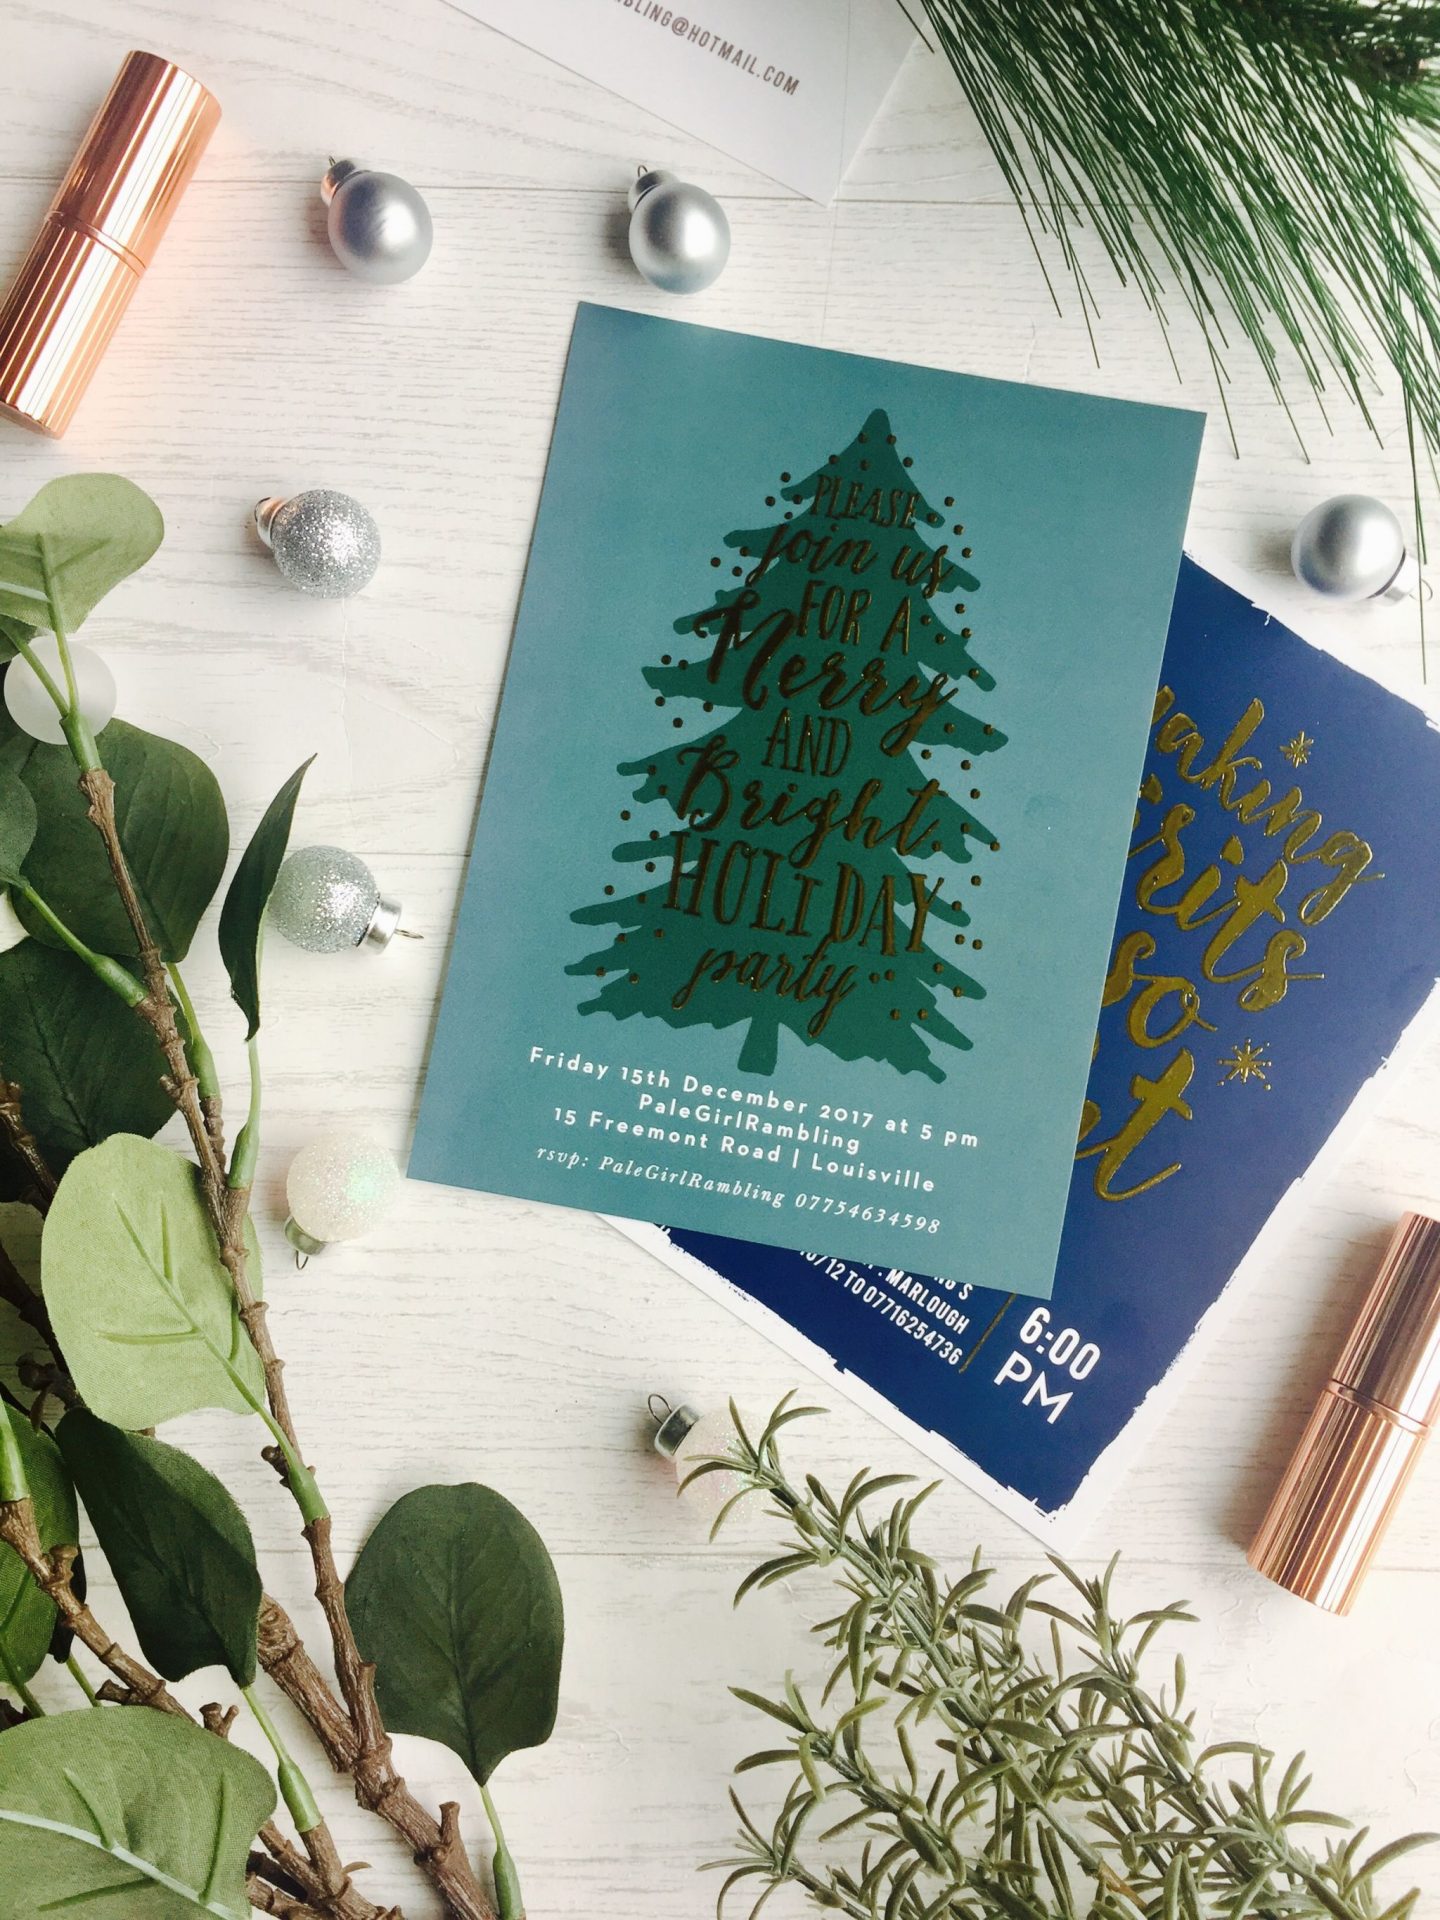 Getting festive with basic Invite and interior inspo